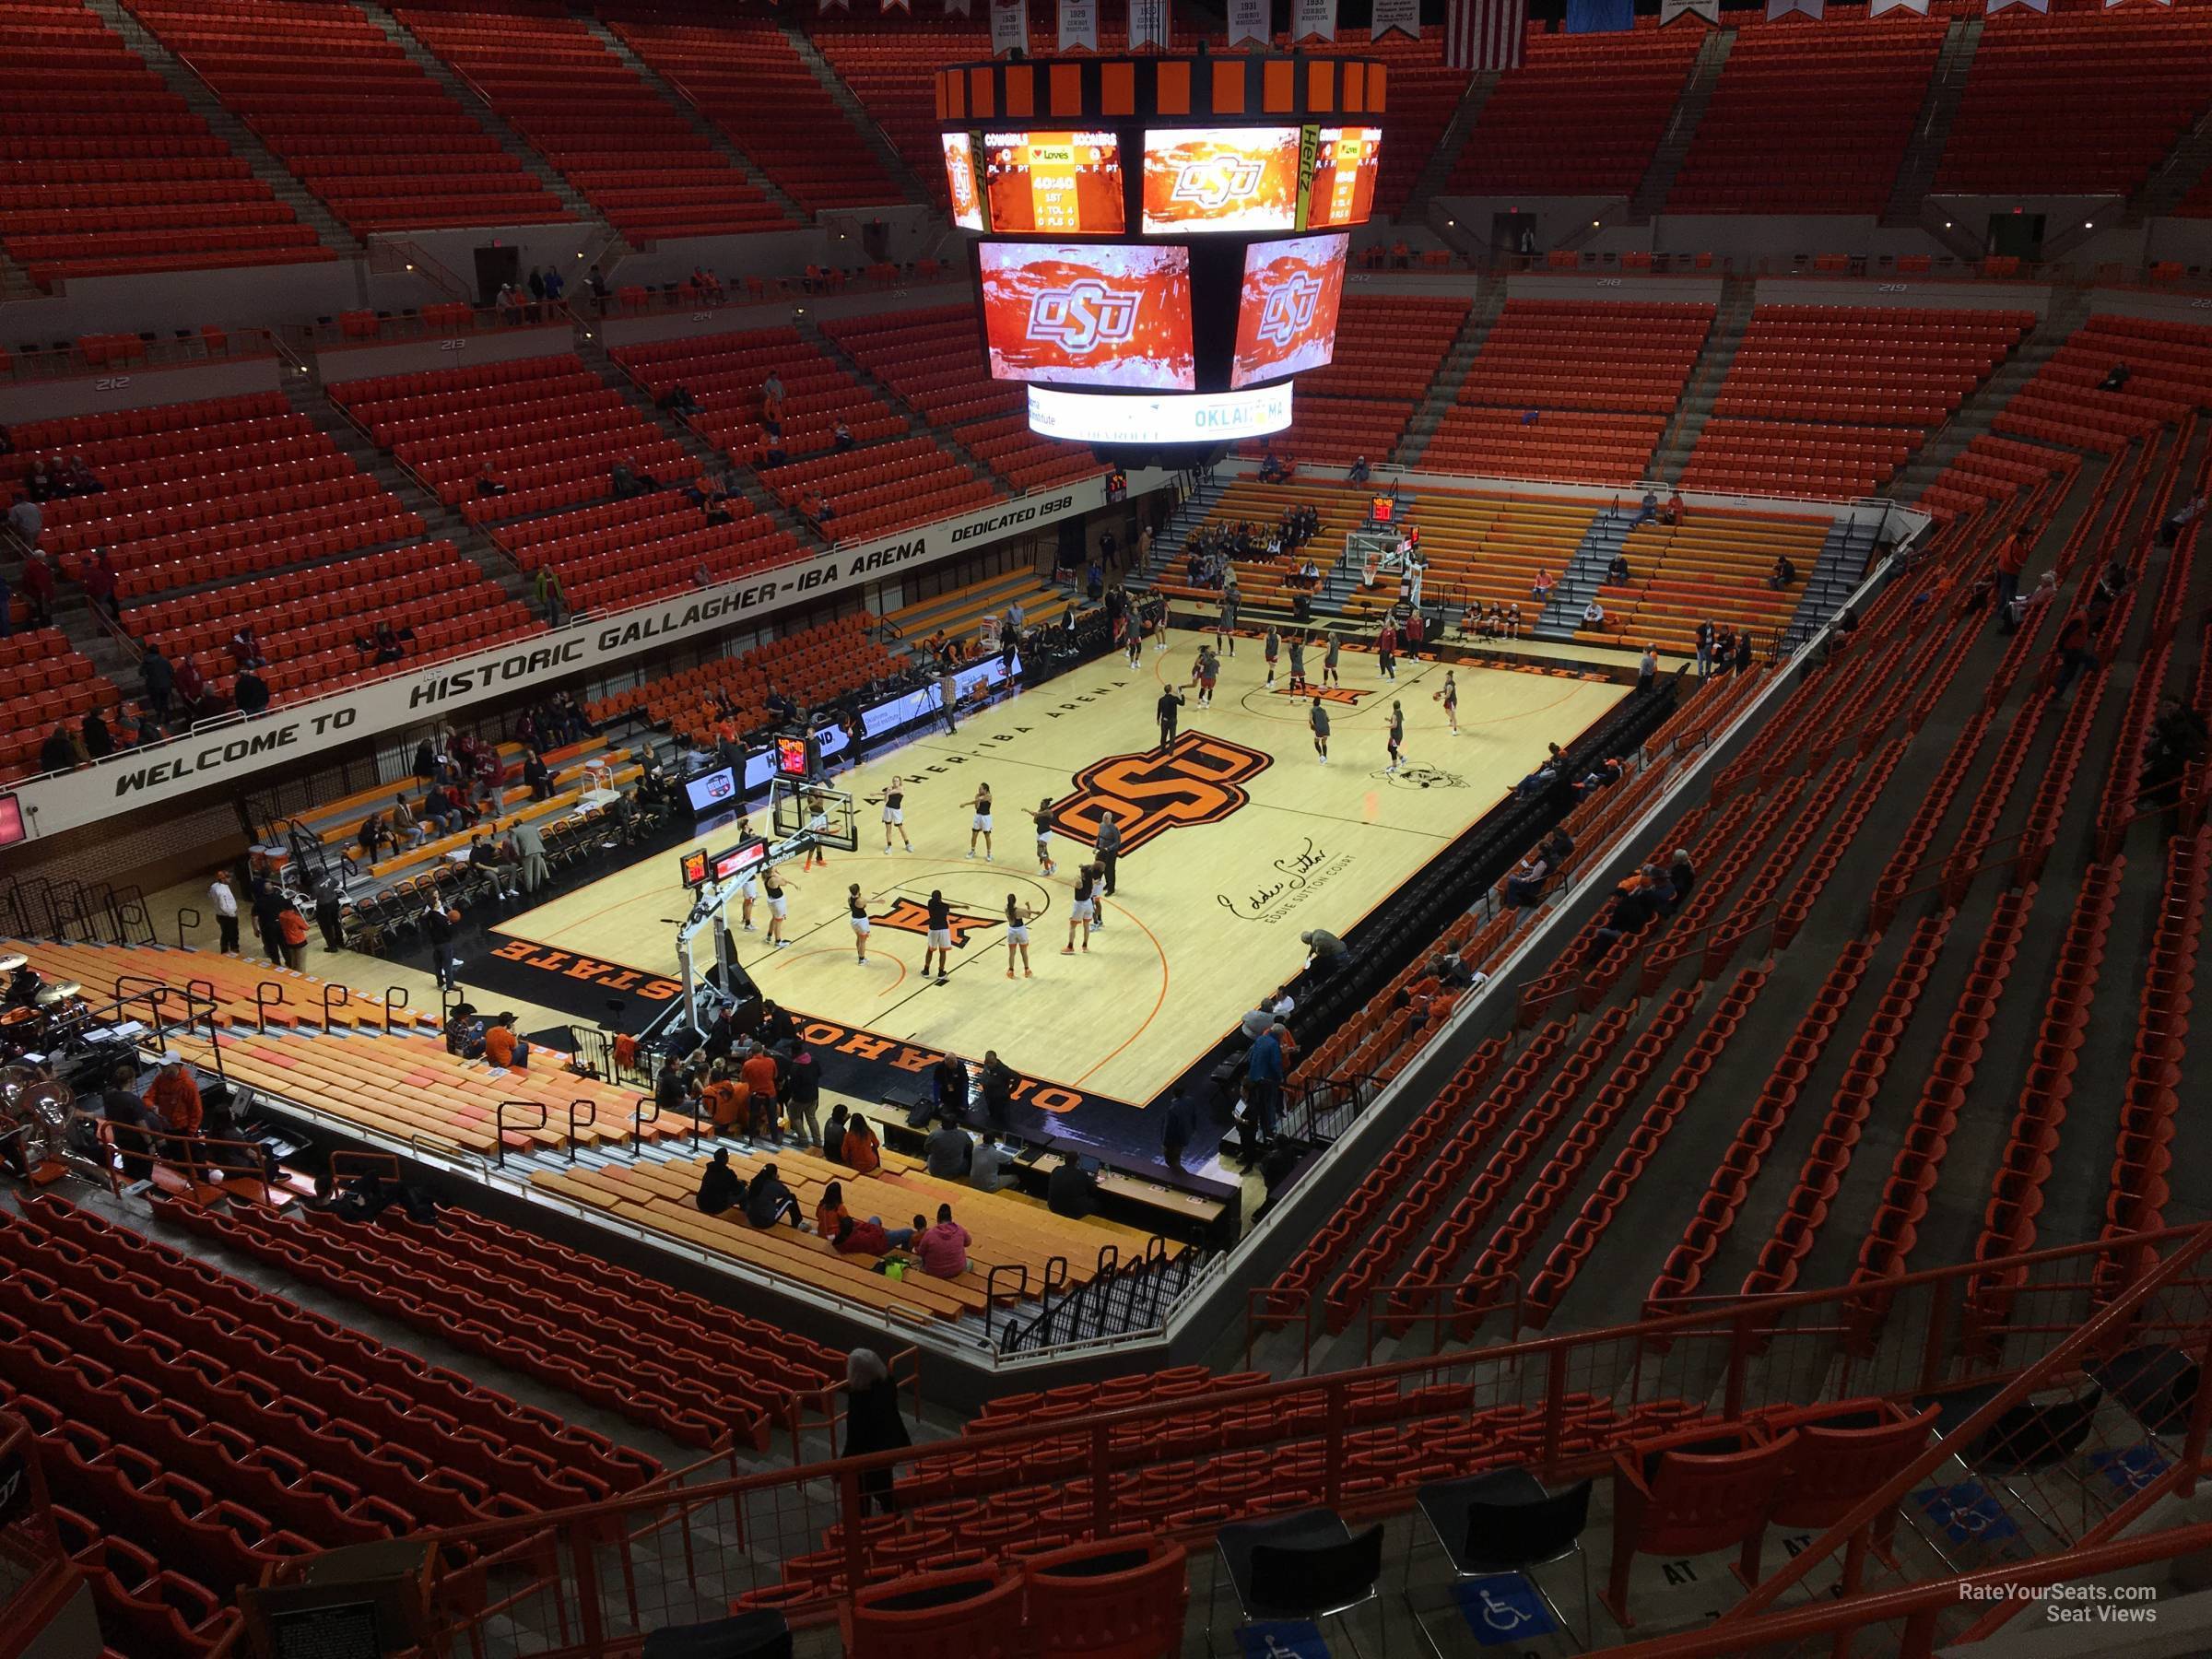 section 308, row 5 seat view  - gallagher-iba arena